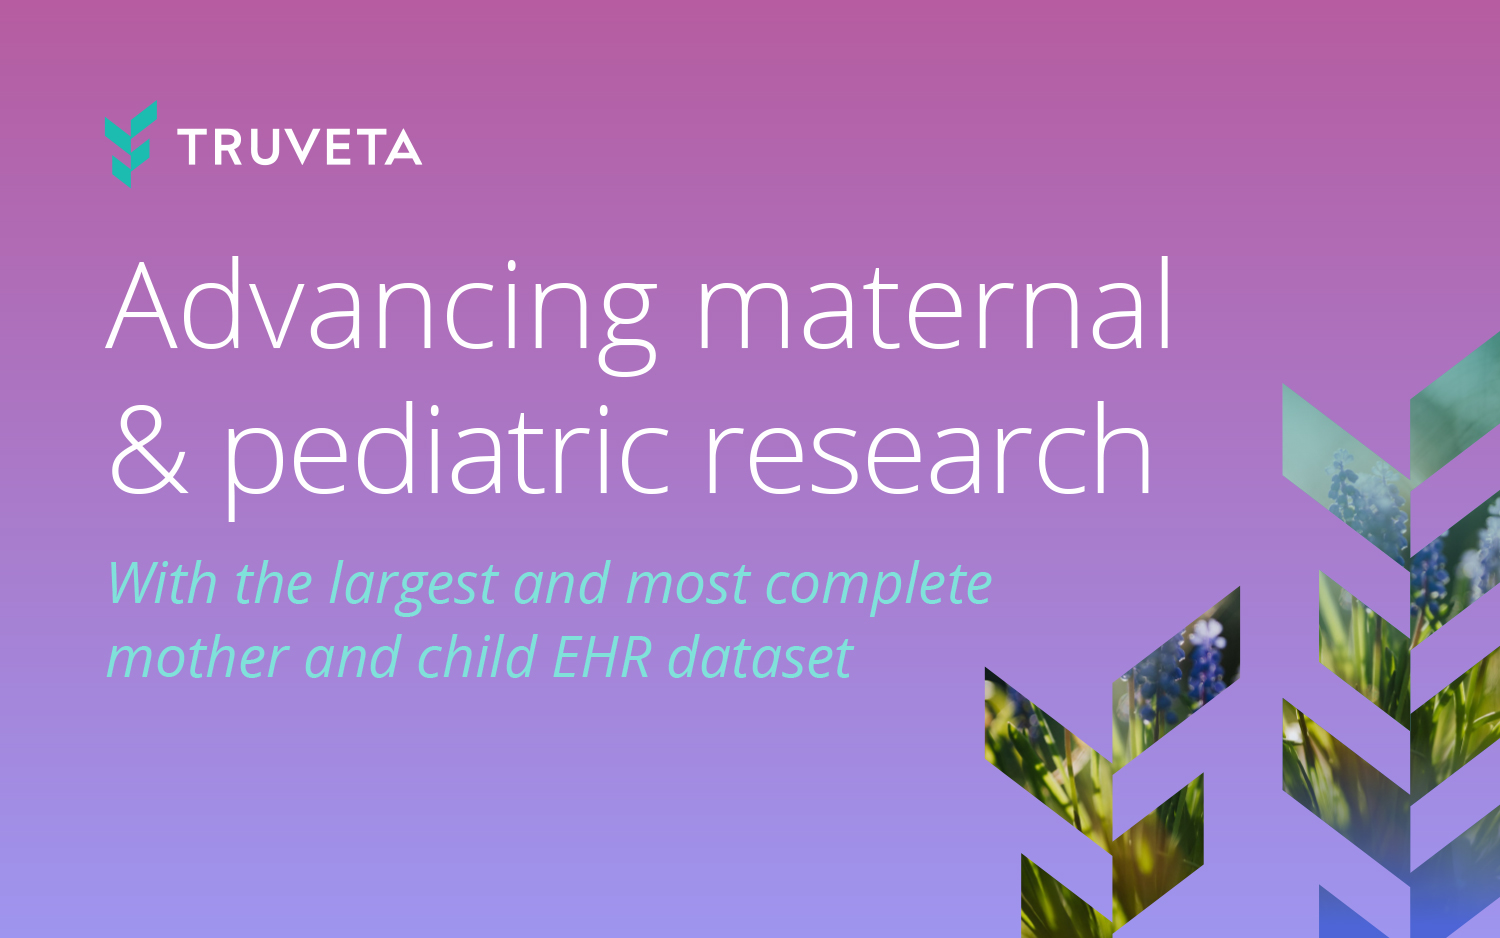 Truveta provides the largest and most complete mother-child electronic health record (EHR) dataset for scientifically rigorous research for mothers and their children.